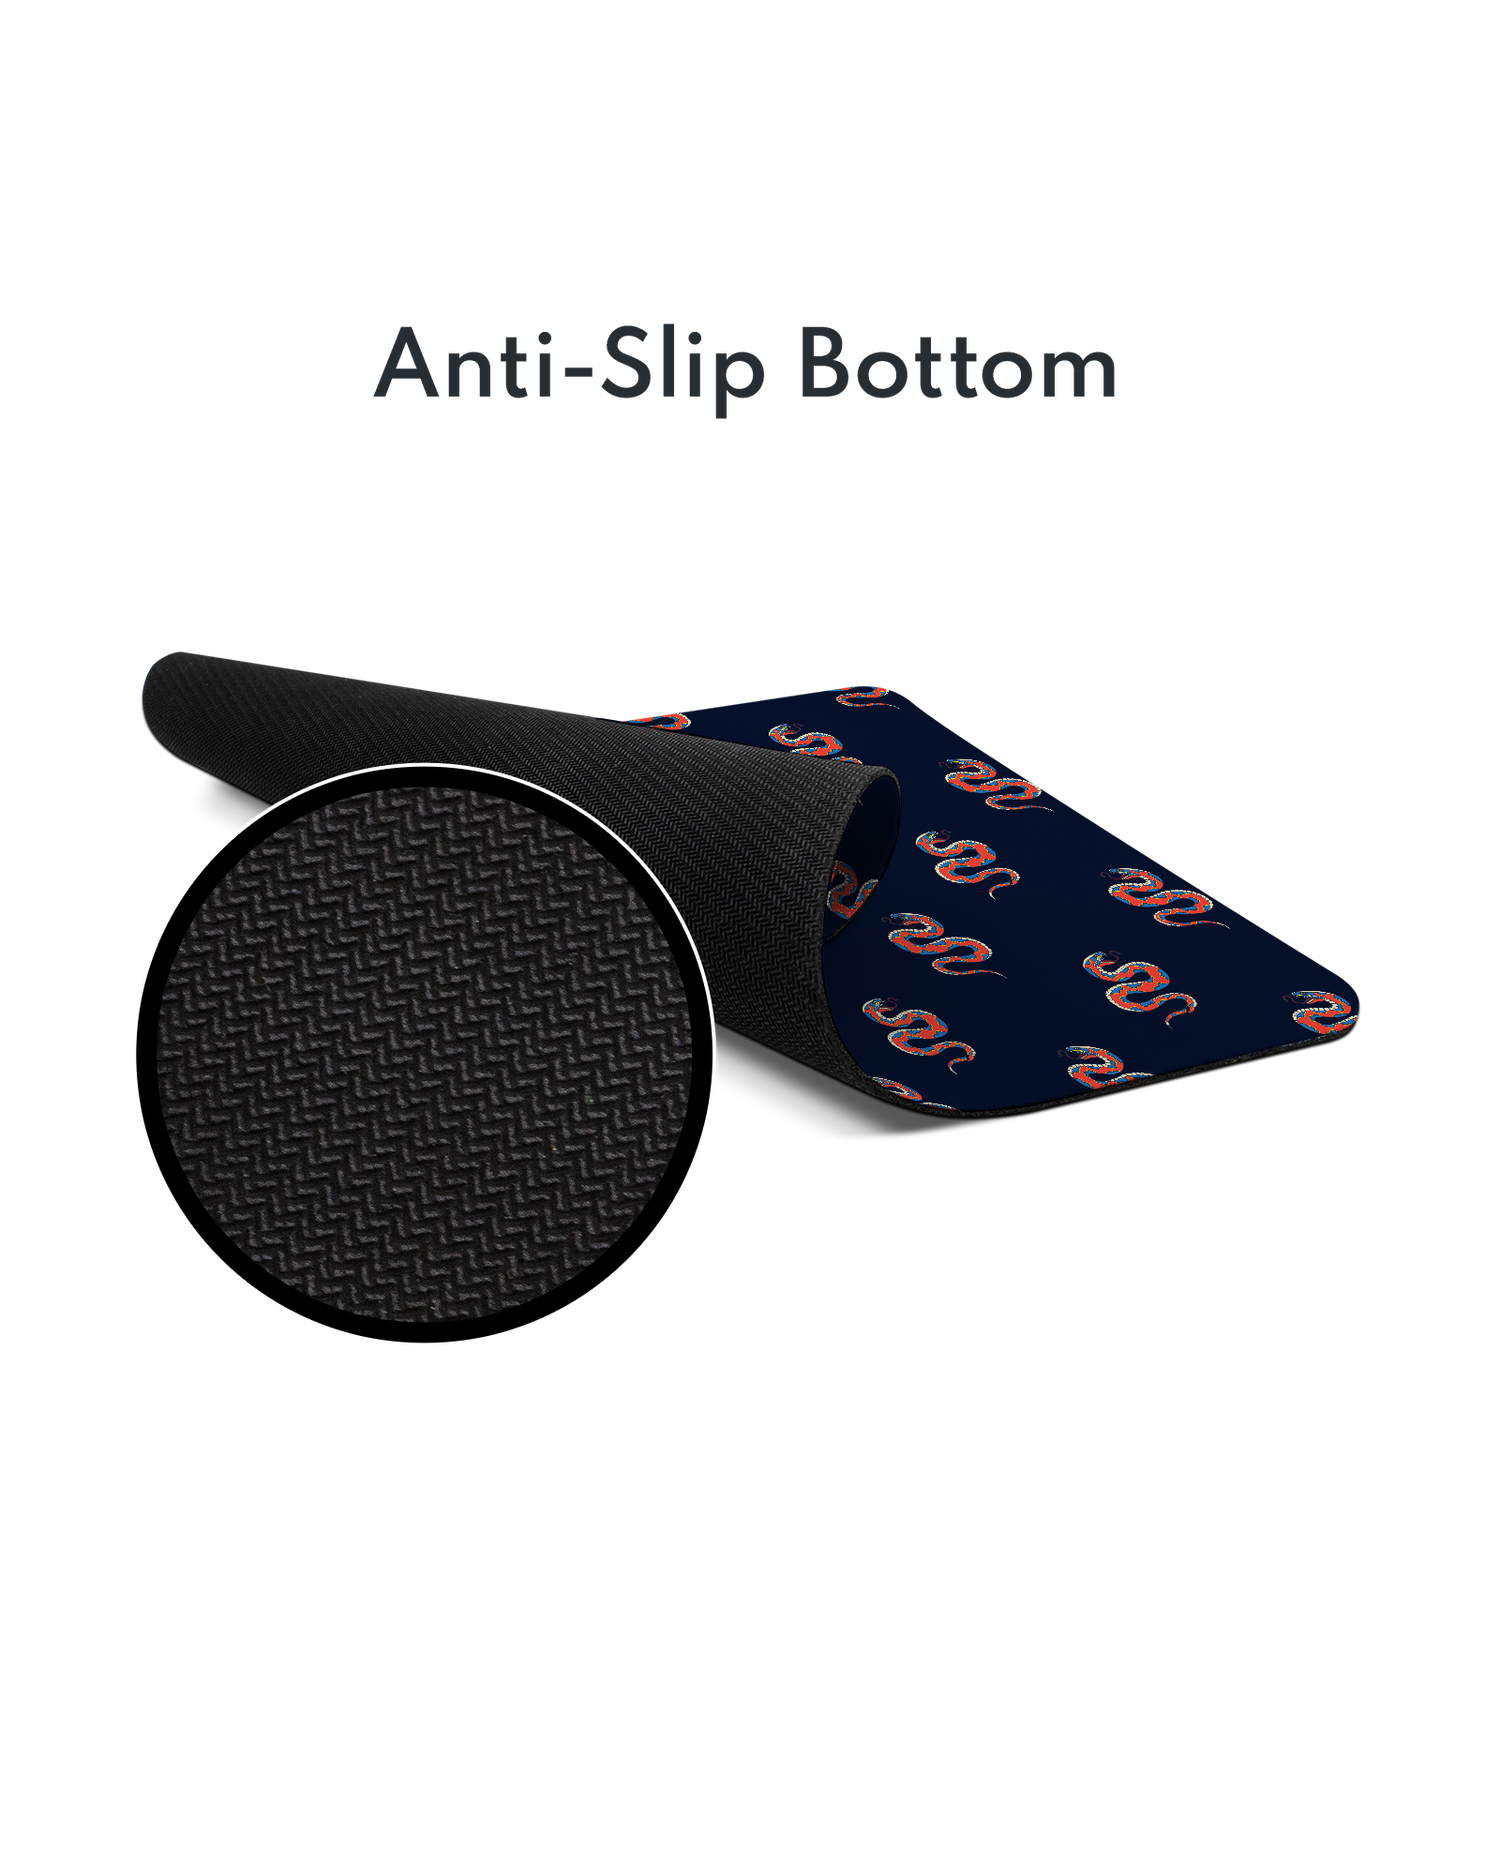 Repeating Snakes Mouse Pad with Non-slip Underside